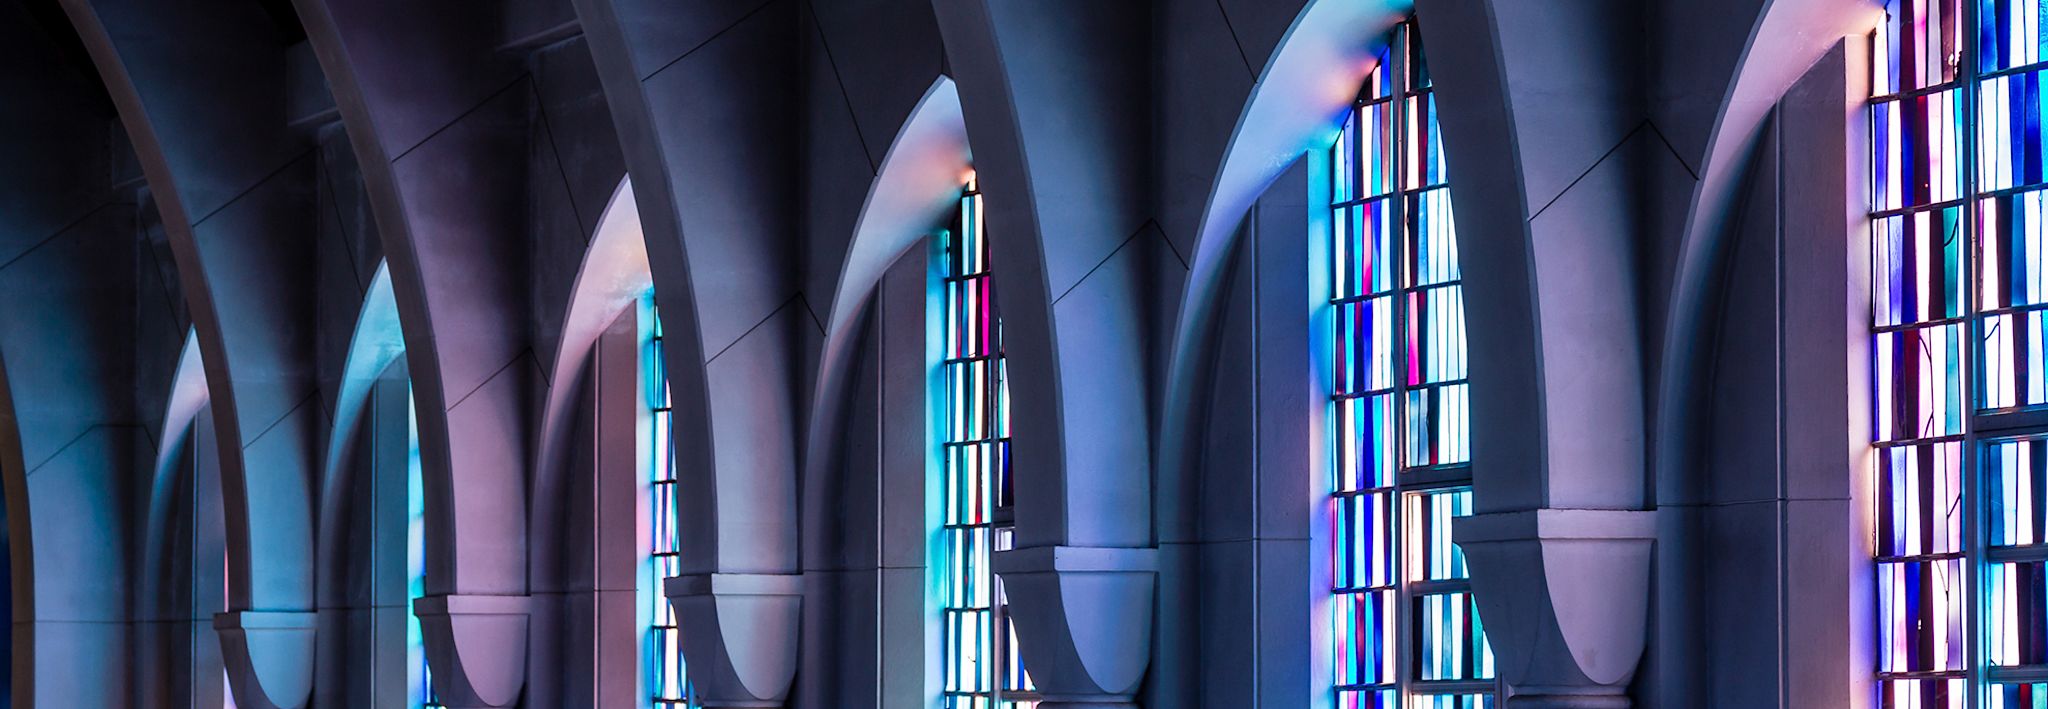 Church has purple and blue stained glass. 